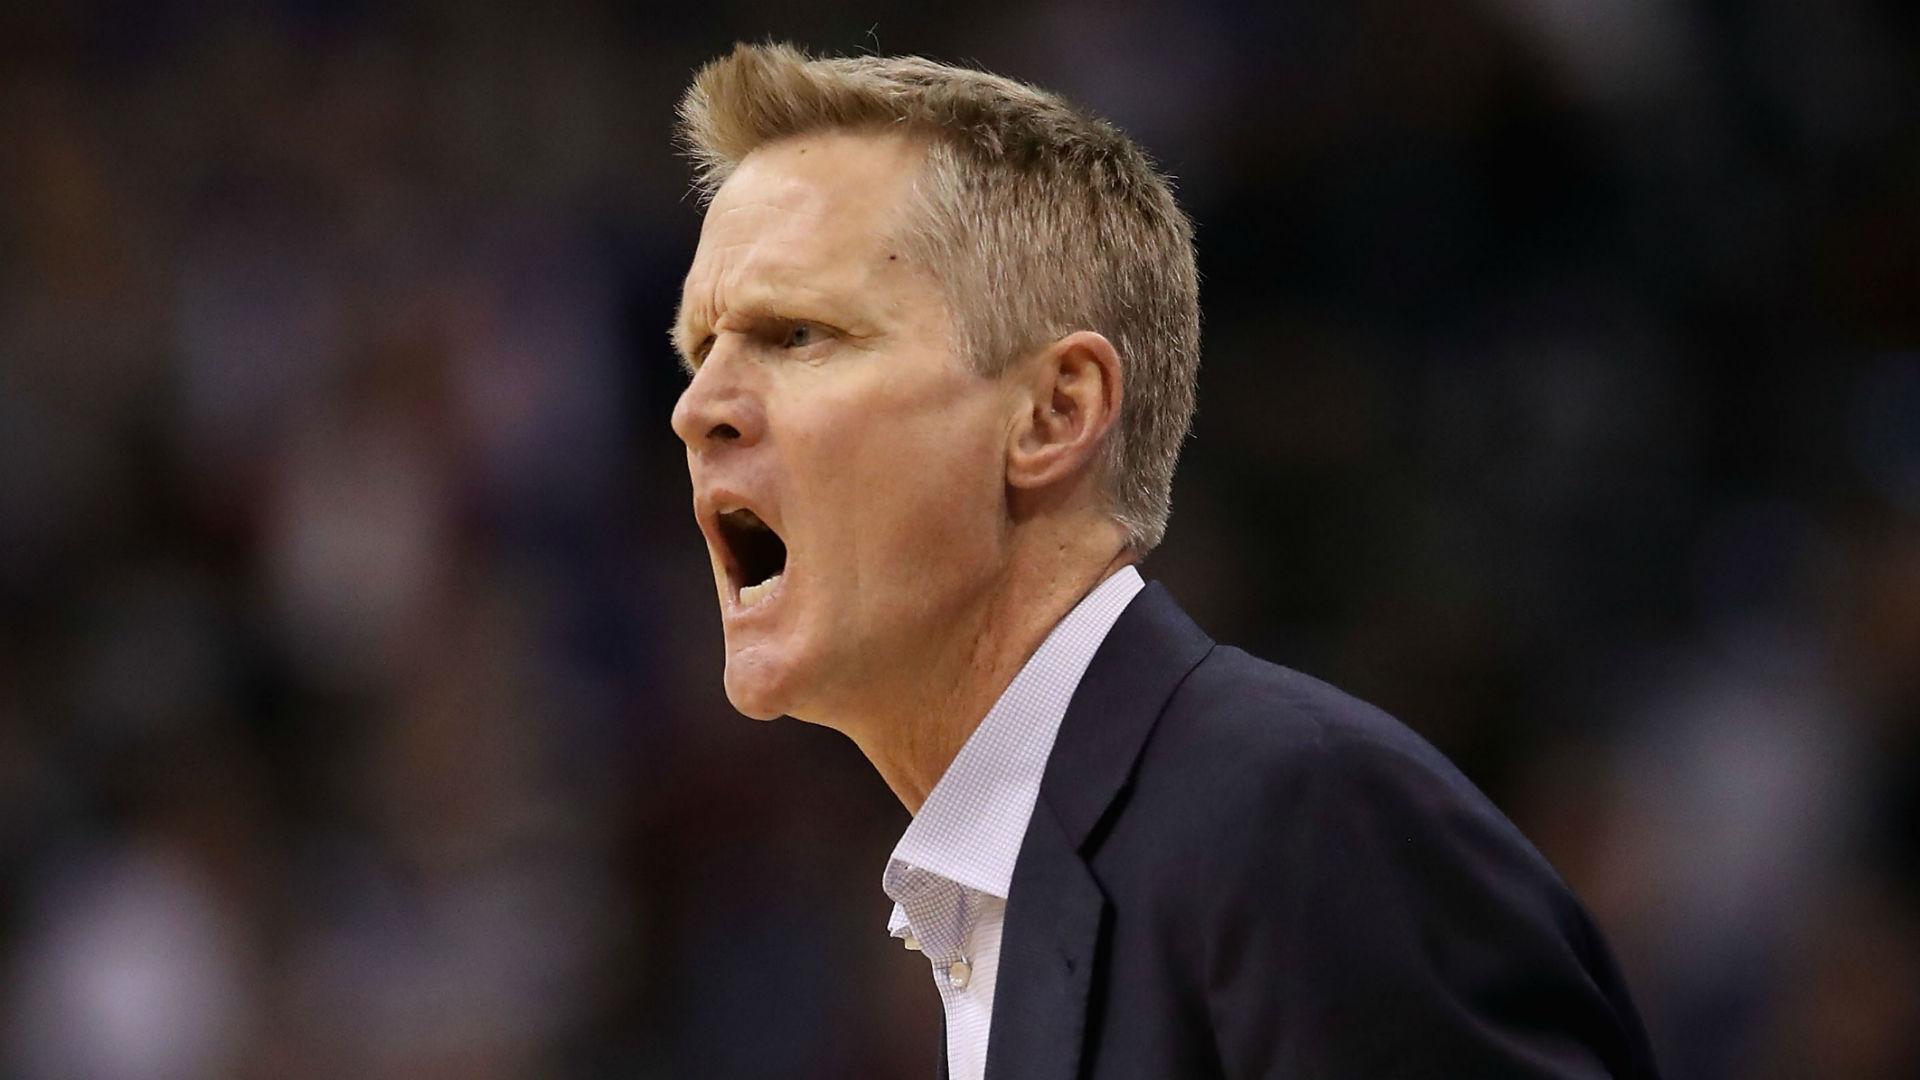 Steve Kerr was ejected after throwing a clipboard in response to a flagrant foul call, and Stephen Curry and Kevin Durant felt sympathy.